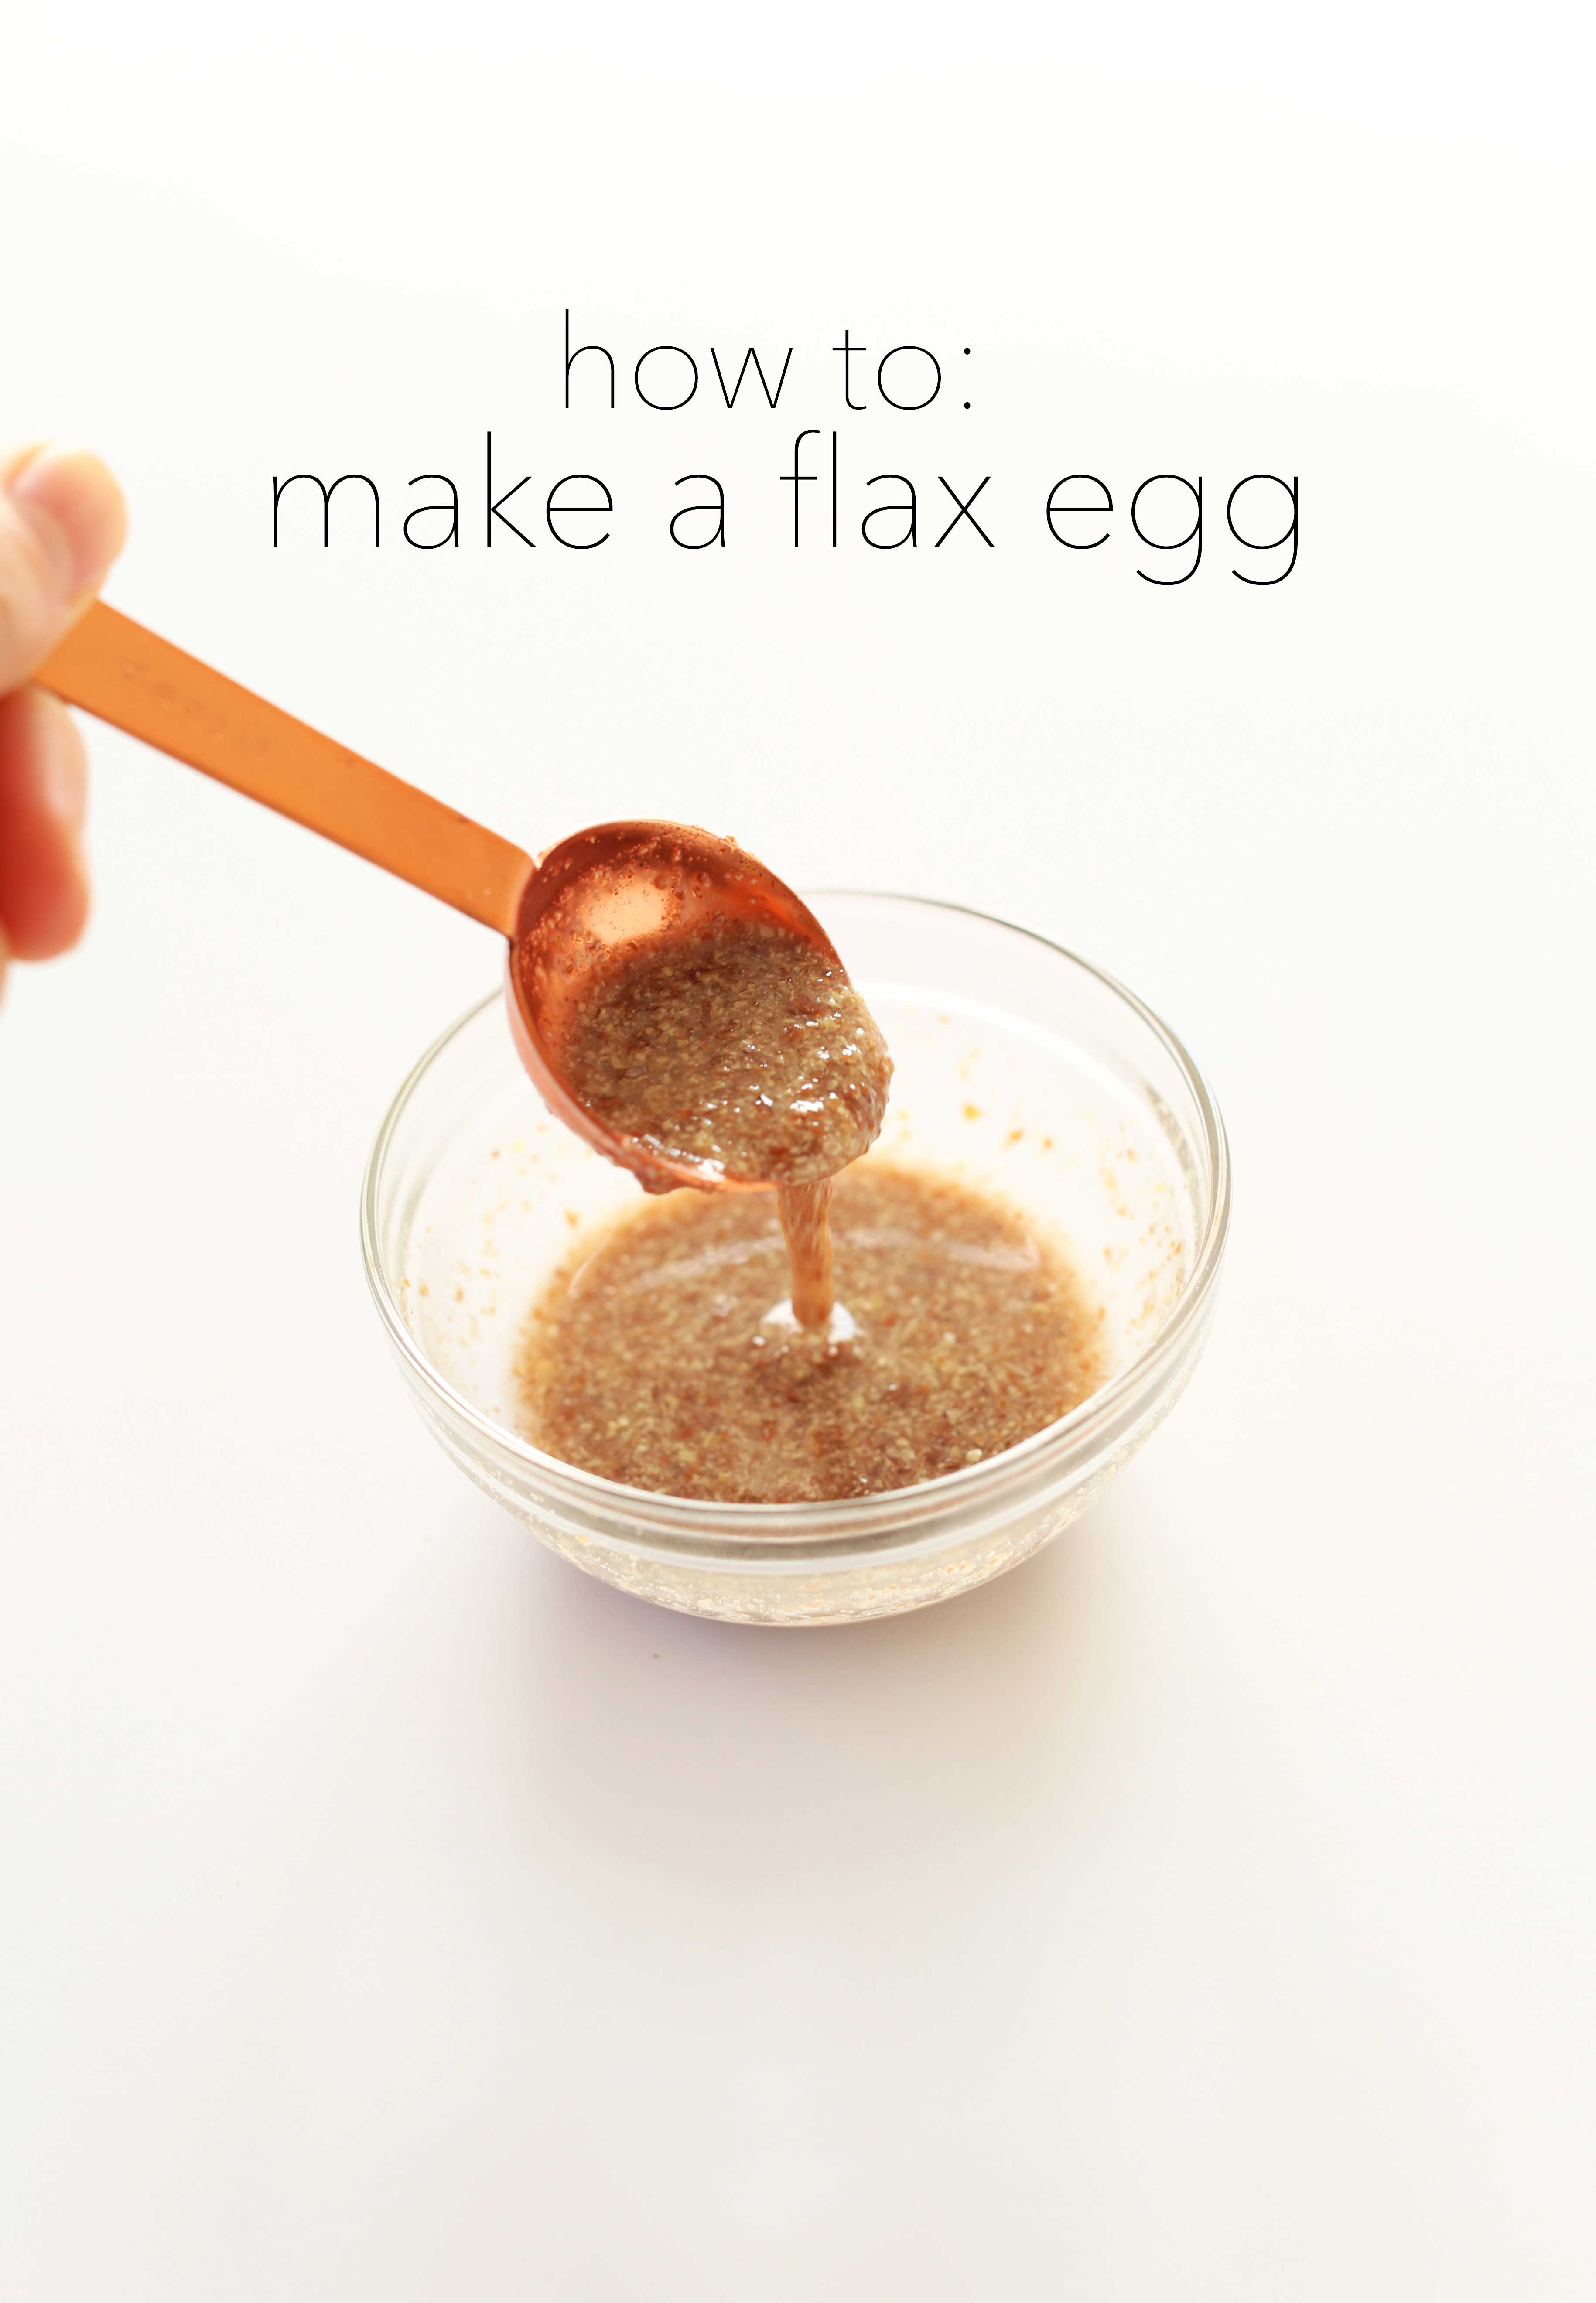 Gooey flax egg dripping from a measuring spoon into a bowl